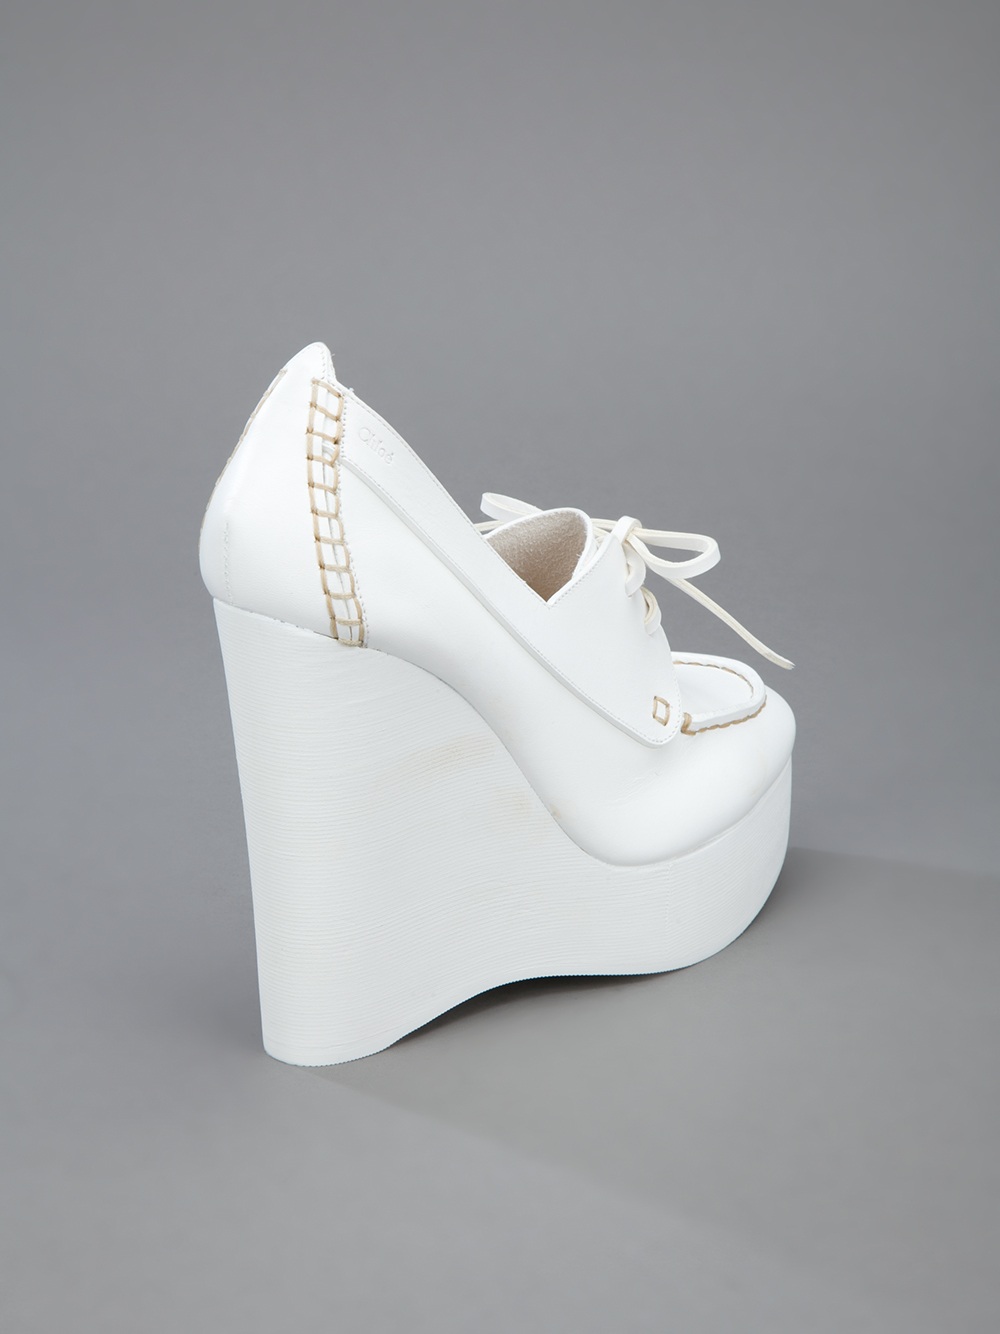 Lyst - Chloé Lace-up Wedge in White